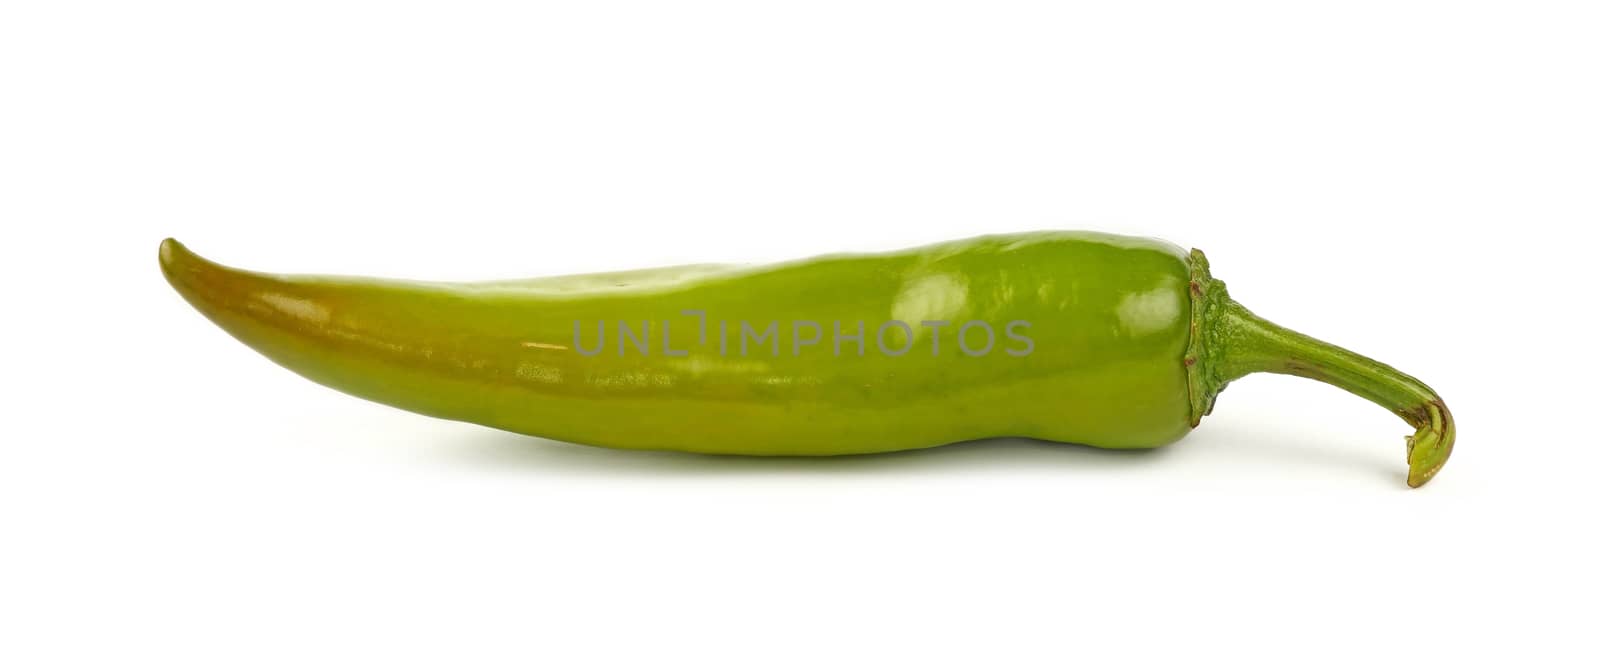 One fresh green jalapeno chili pepper isolated on white background, close up, side low angle view